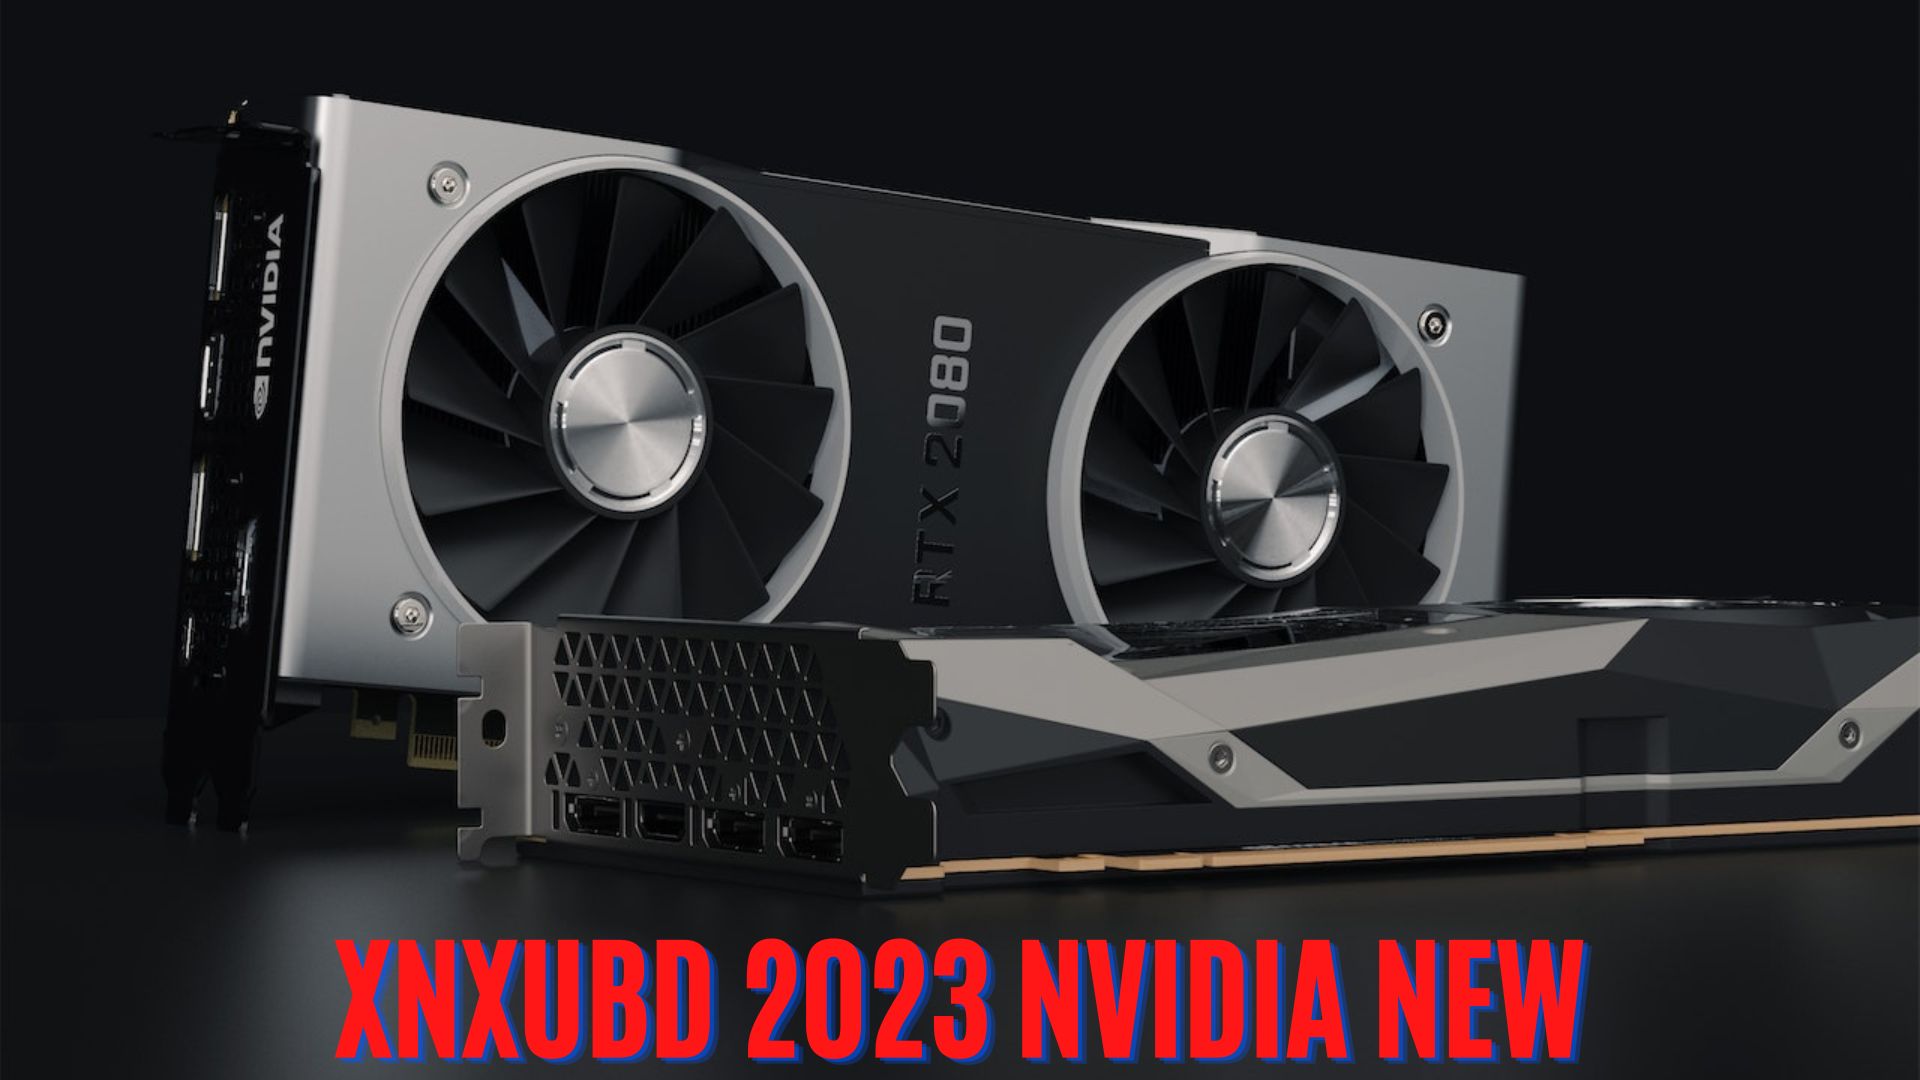 Xnxubd 2023 Nvidia New - The Future Of Graphics Technology